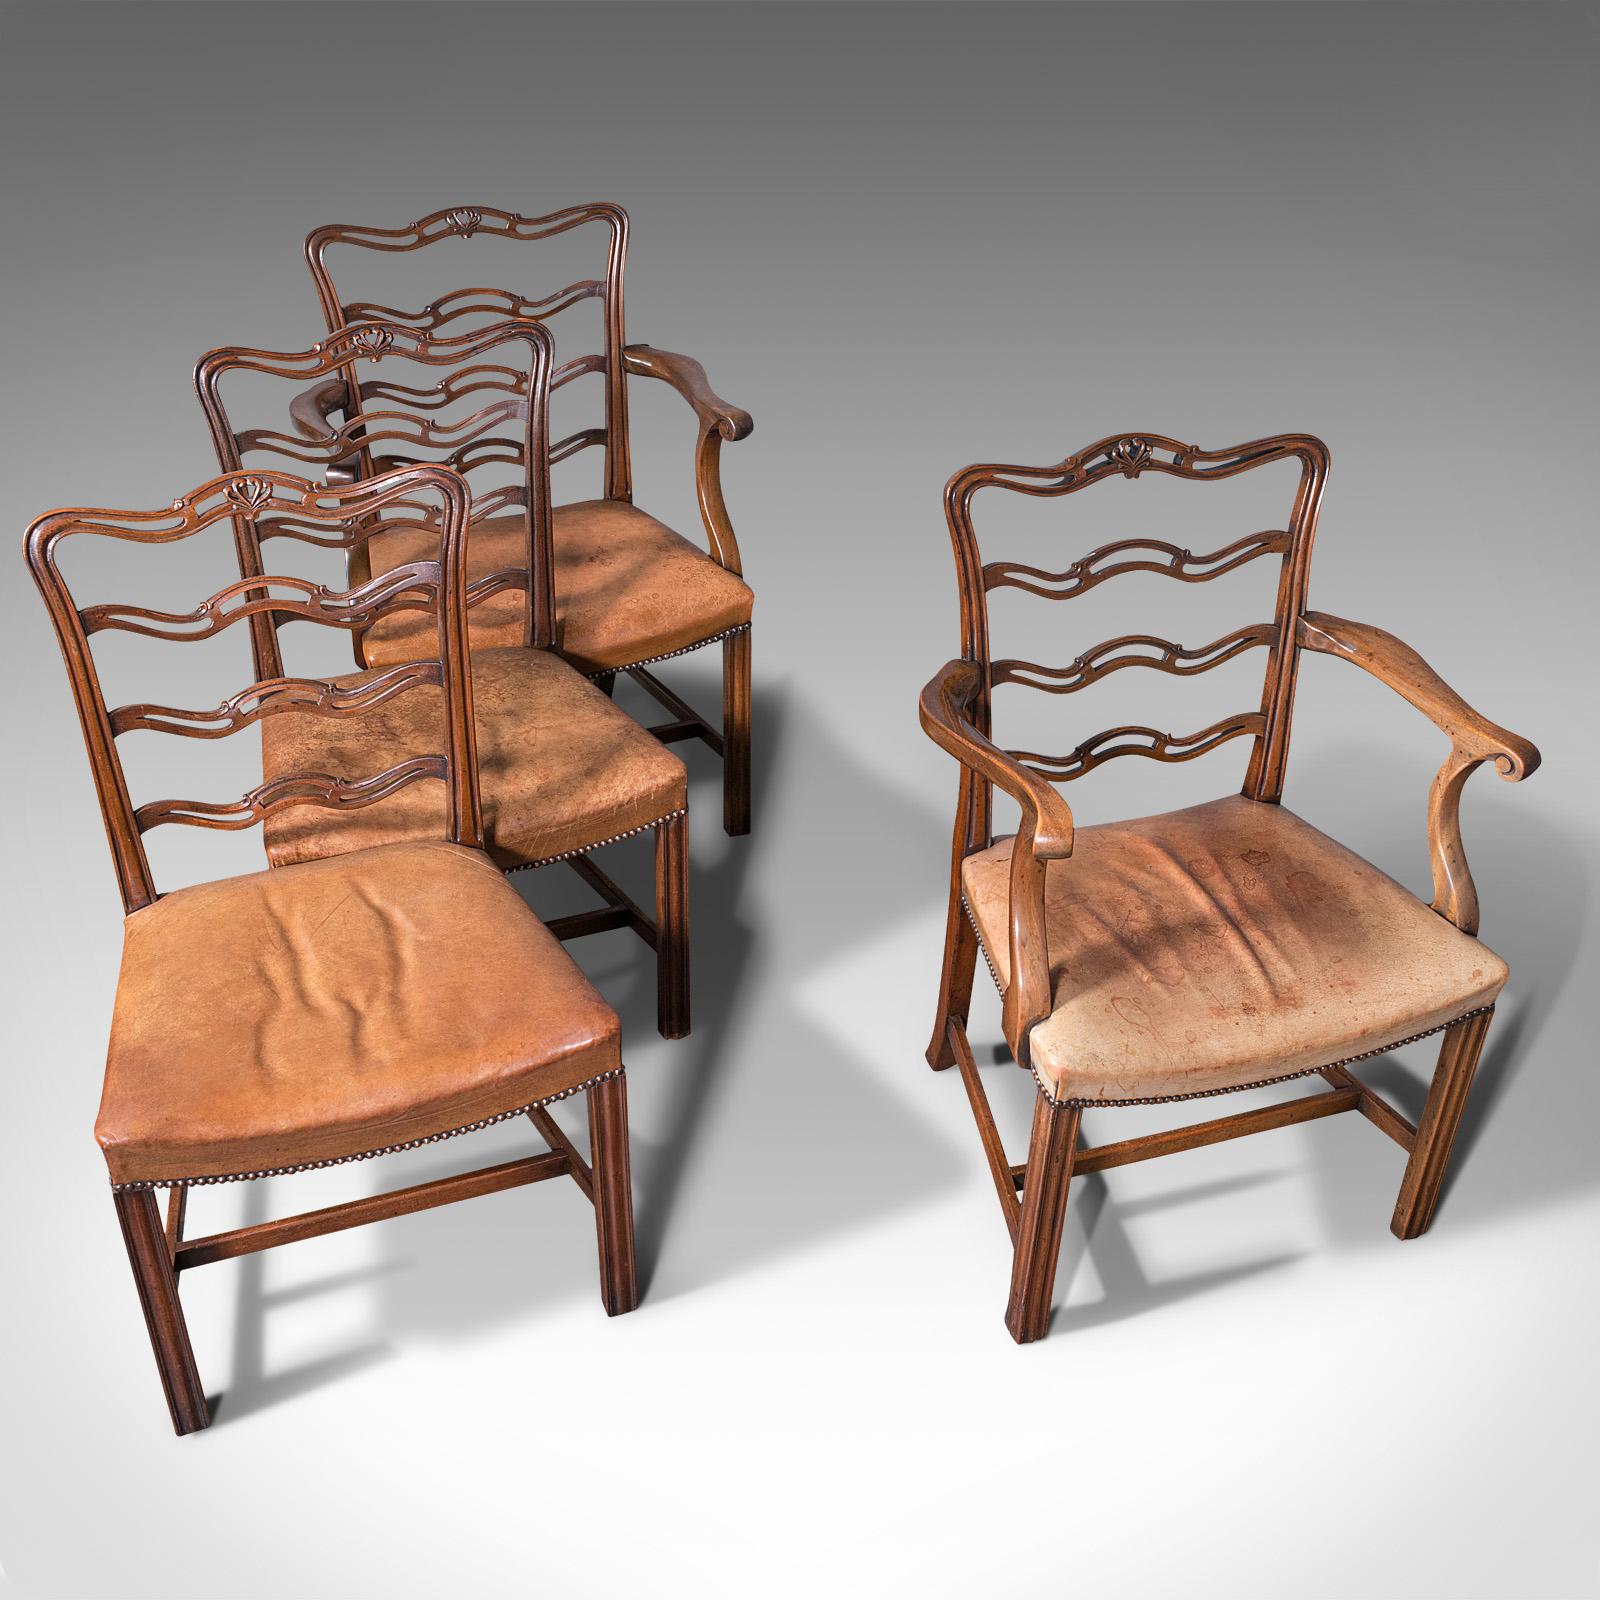 Set of 4 Vintage Ladder Back Chairs, Irish, Carver, Seat, Art Deco, Circa 1940 For Sale 2